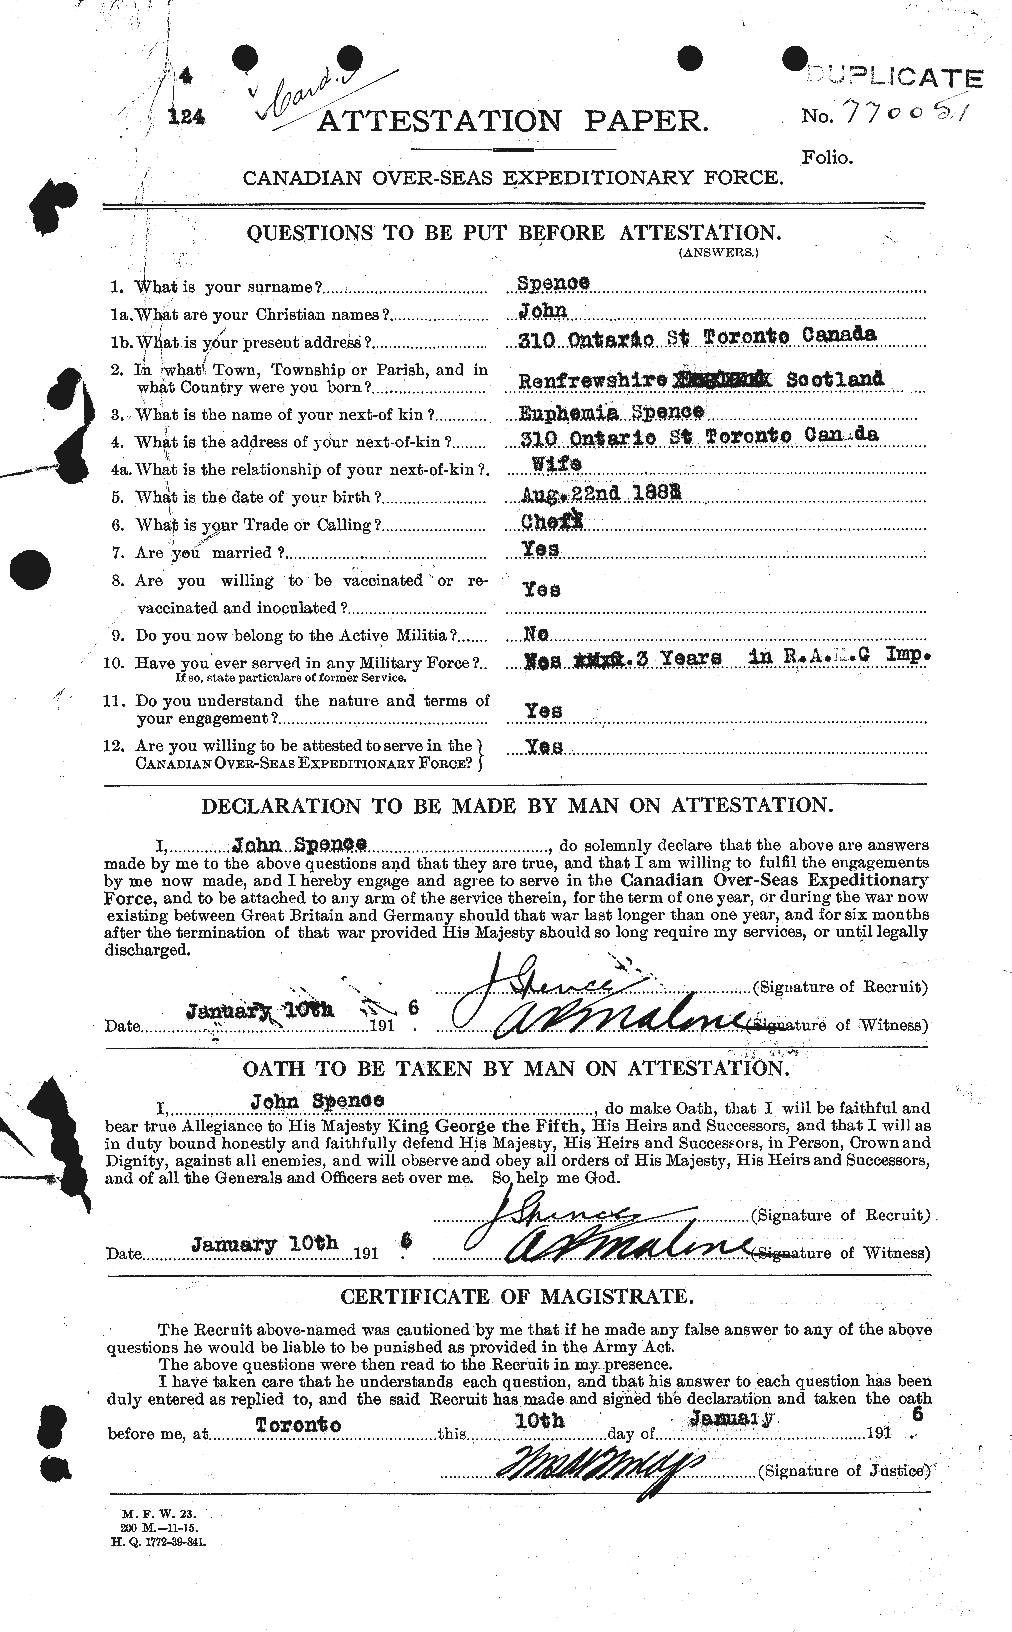 Personnel Records of the First World War - CEF 621367a